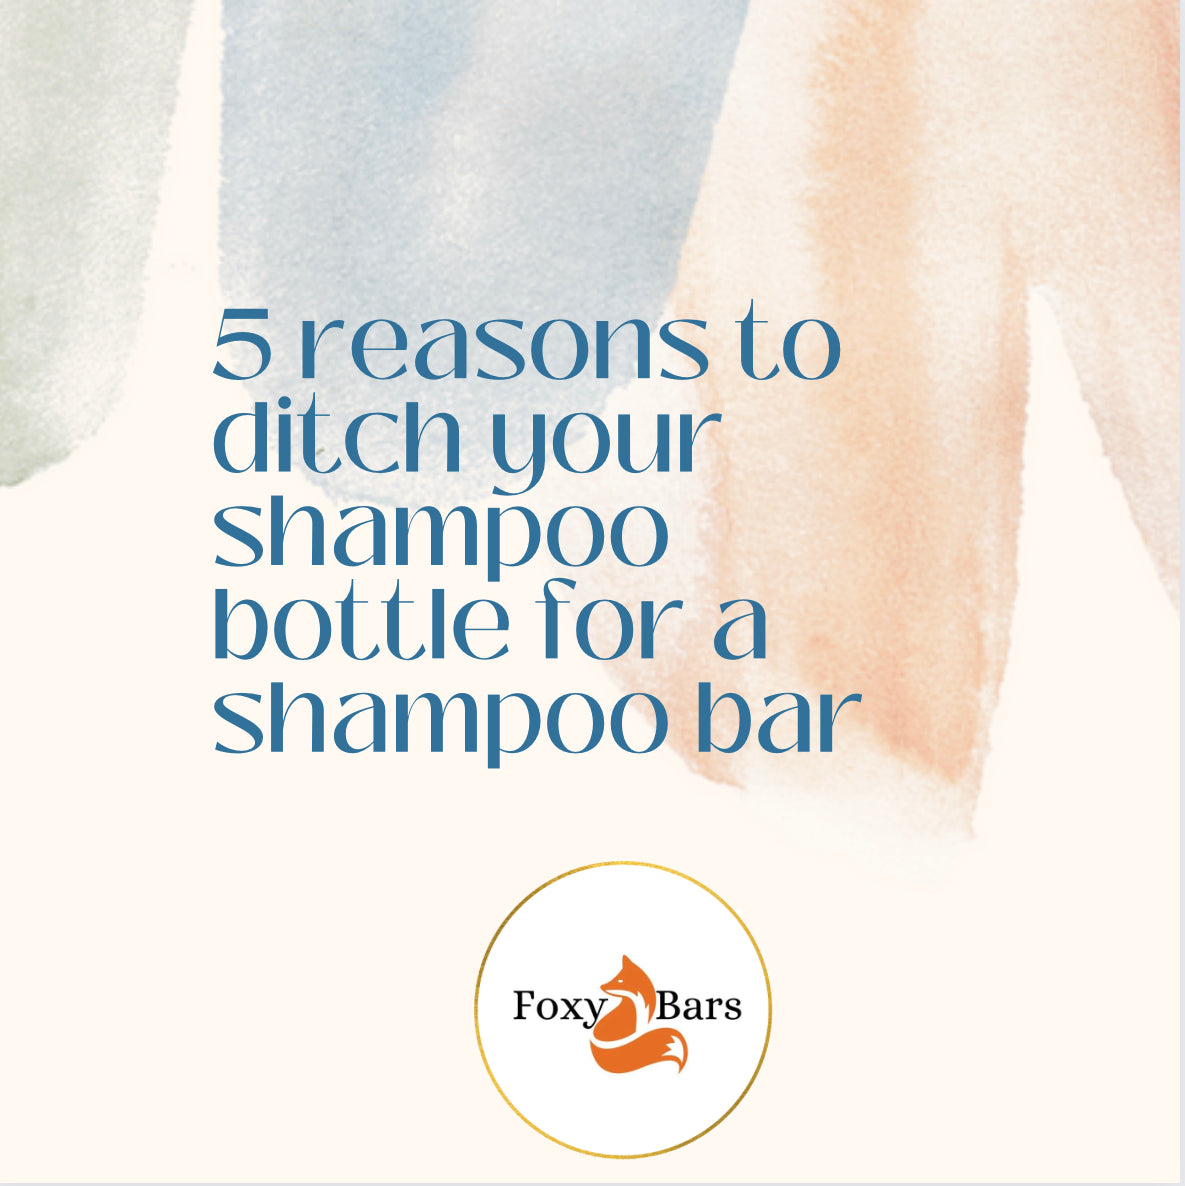 5 Reasons To Ditch Your Shampoo Bottle for a Tallow Shampoo Bar